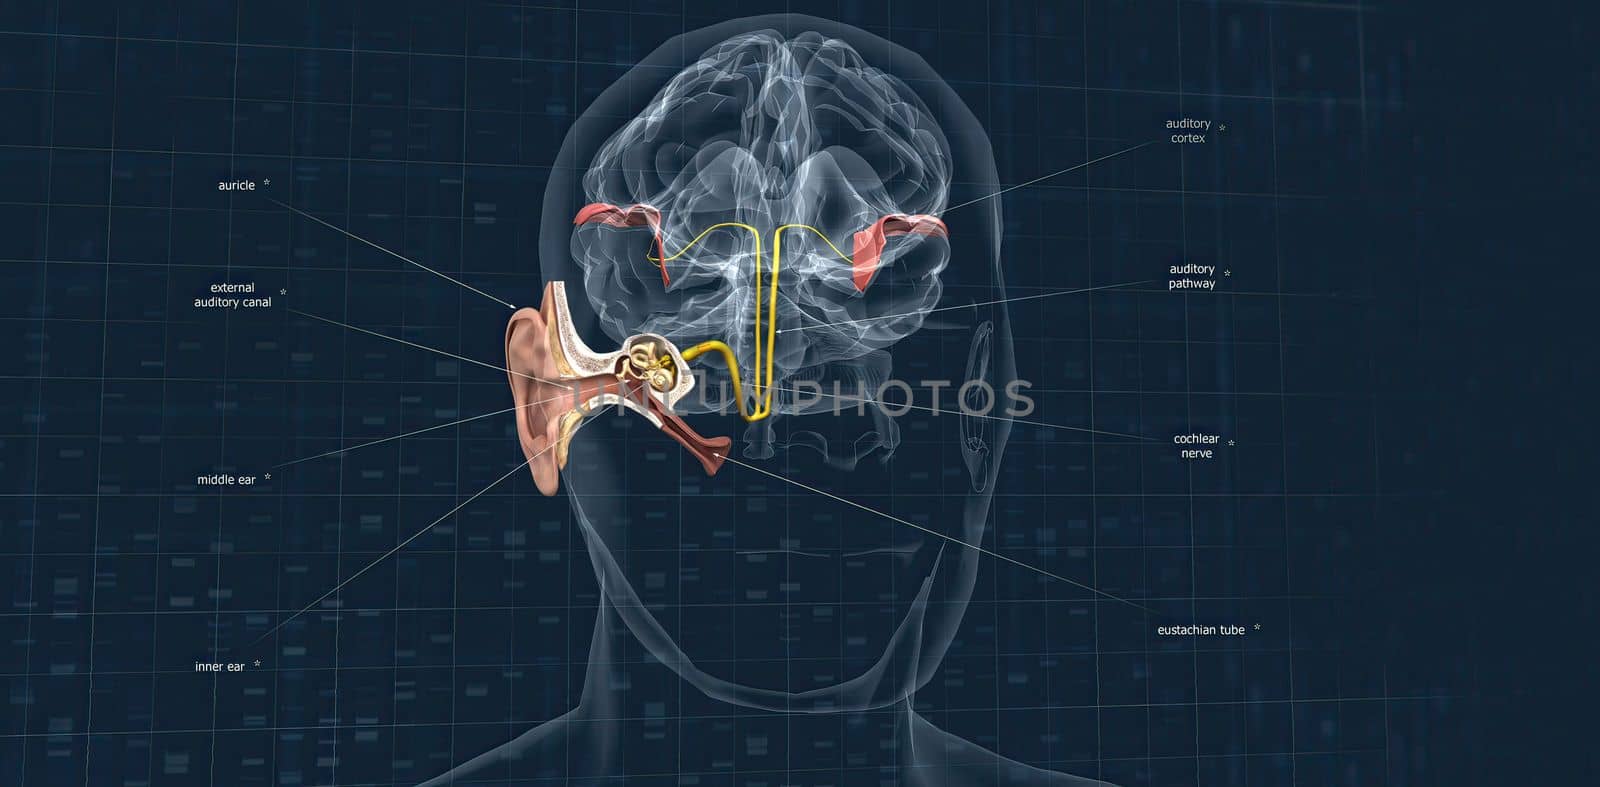 The auditory cortex is the sensory system for the sense of hearing. It includes both the sensory organs (the ears) and the auditory parts of the senso 3D illustration